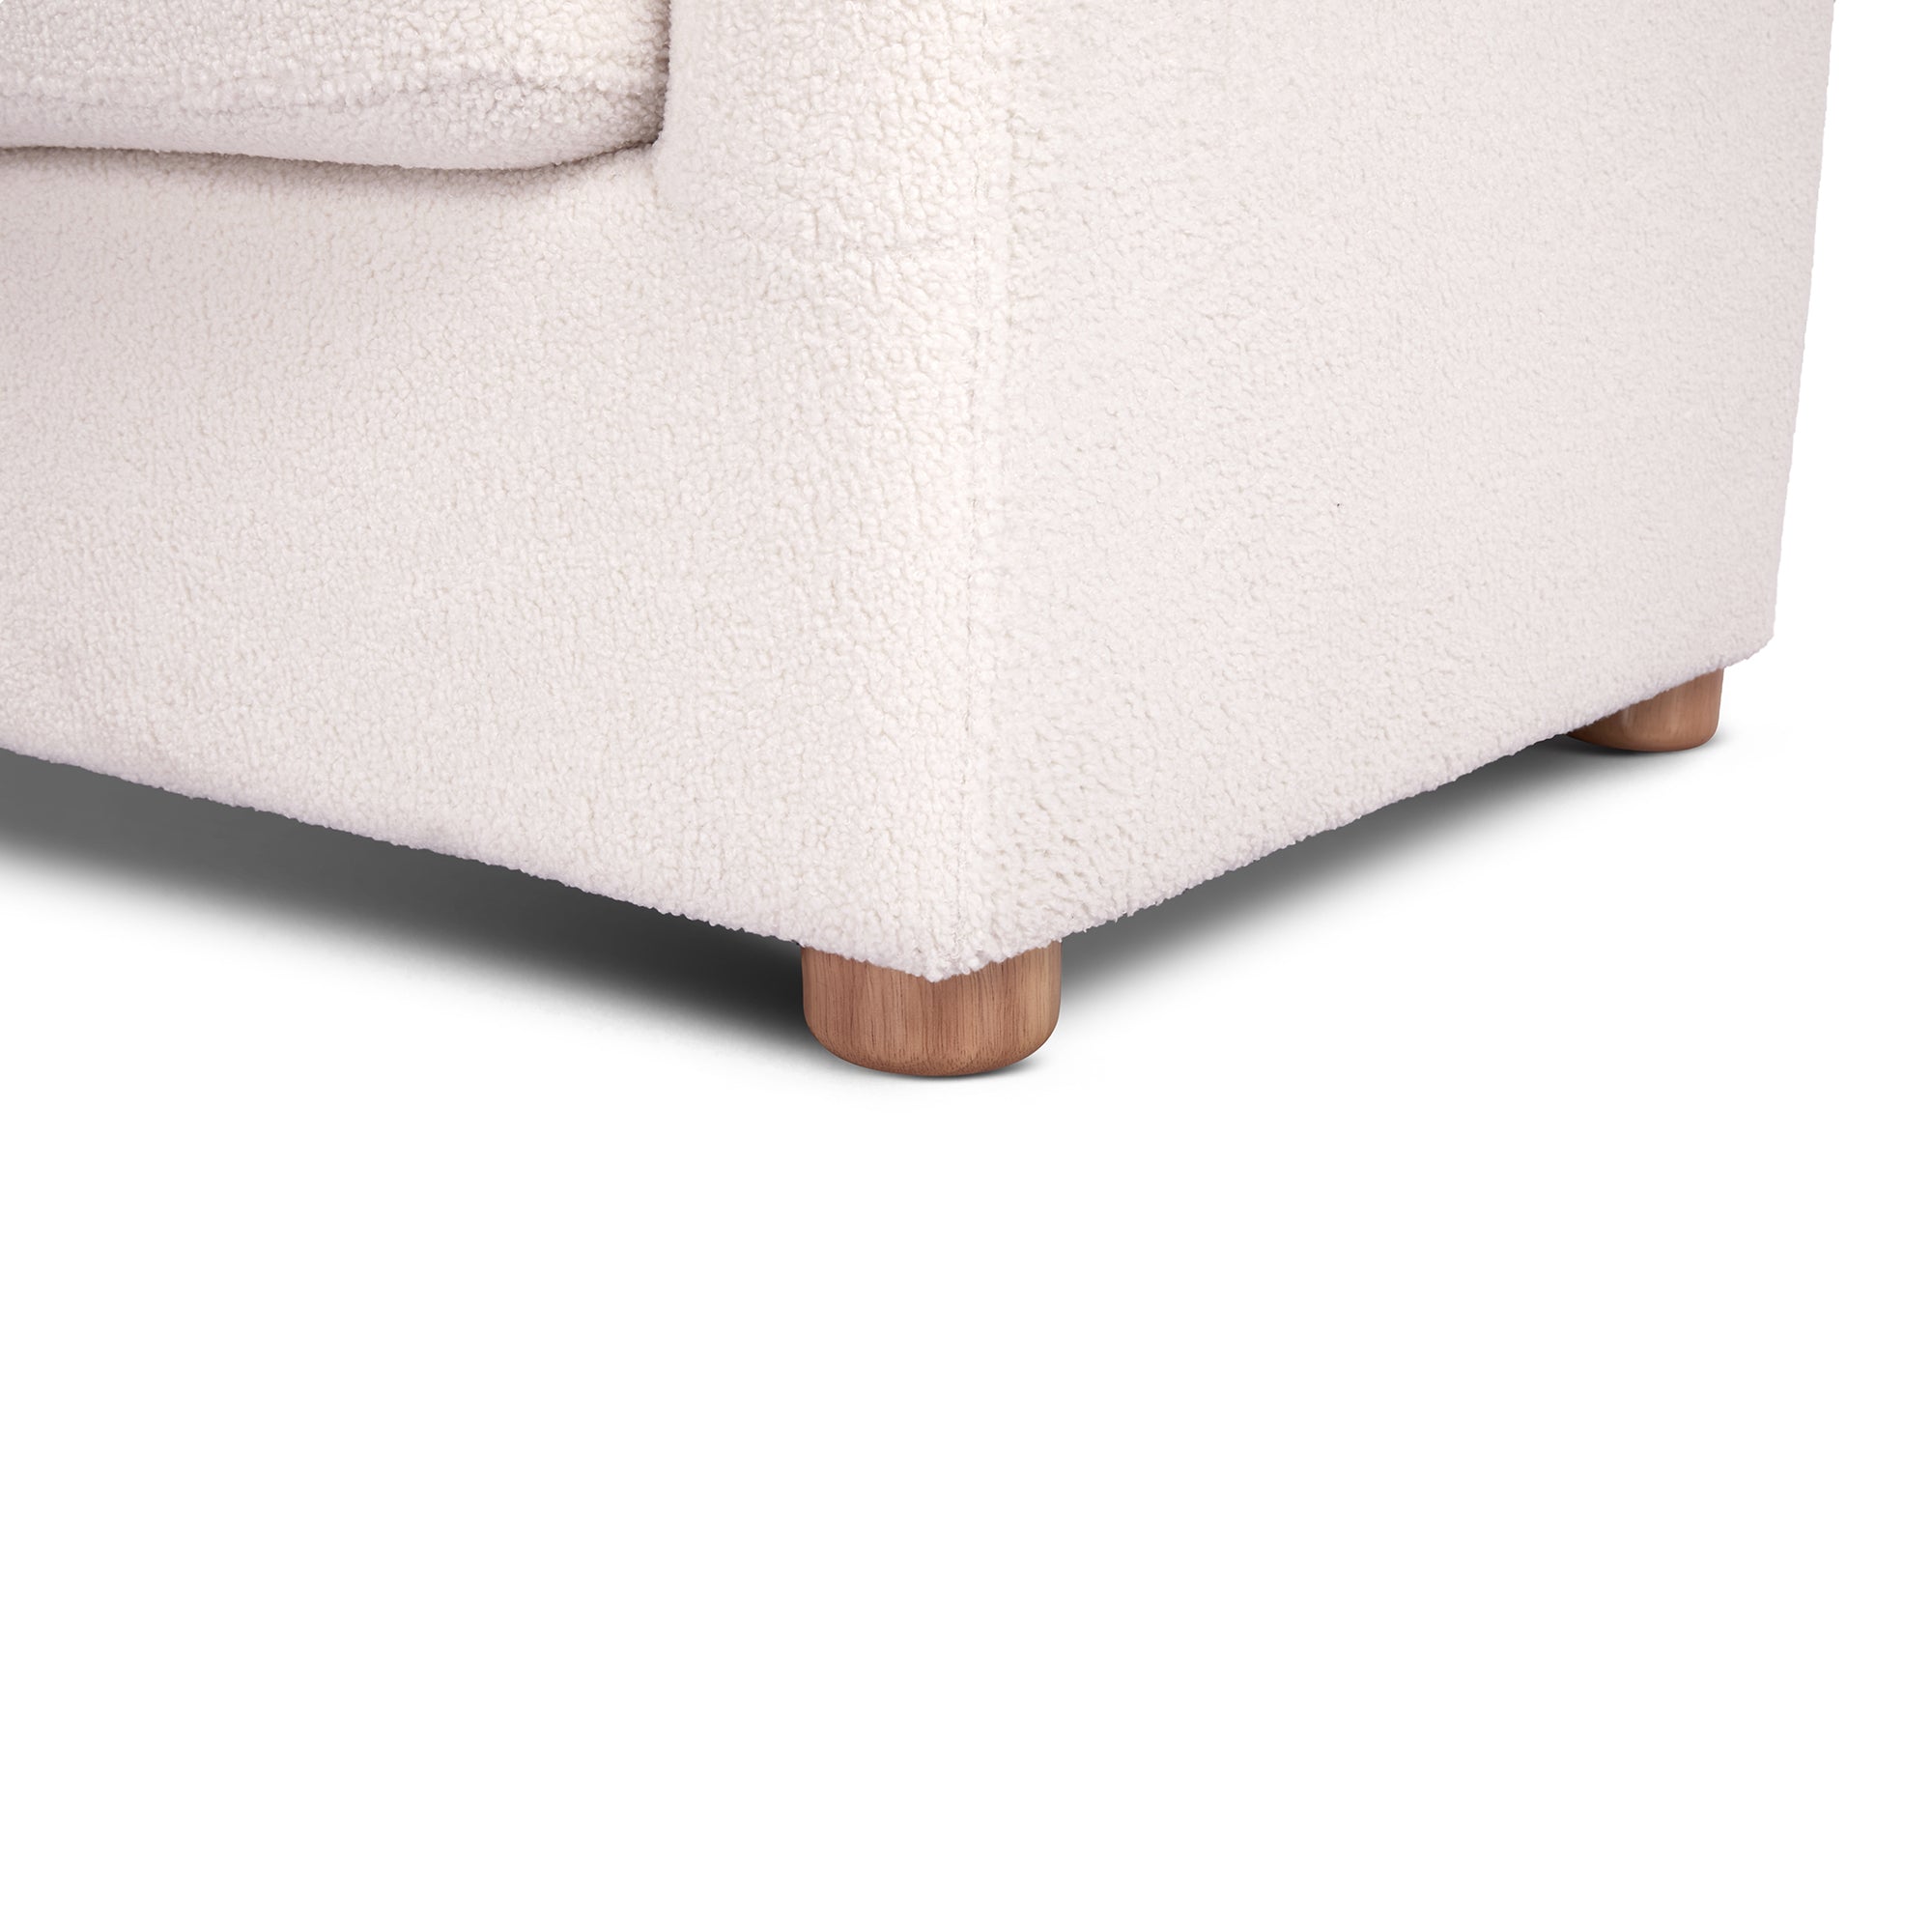 Emerson Sherpa Accent Chair